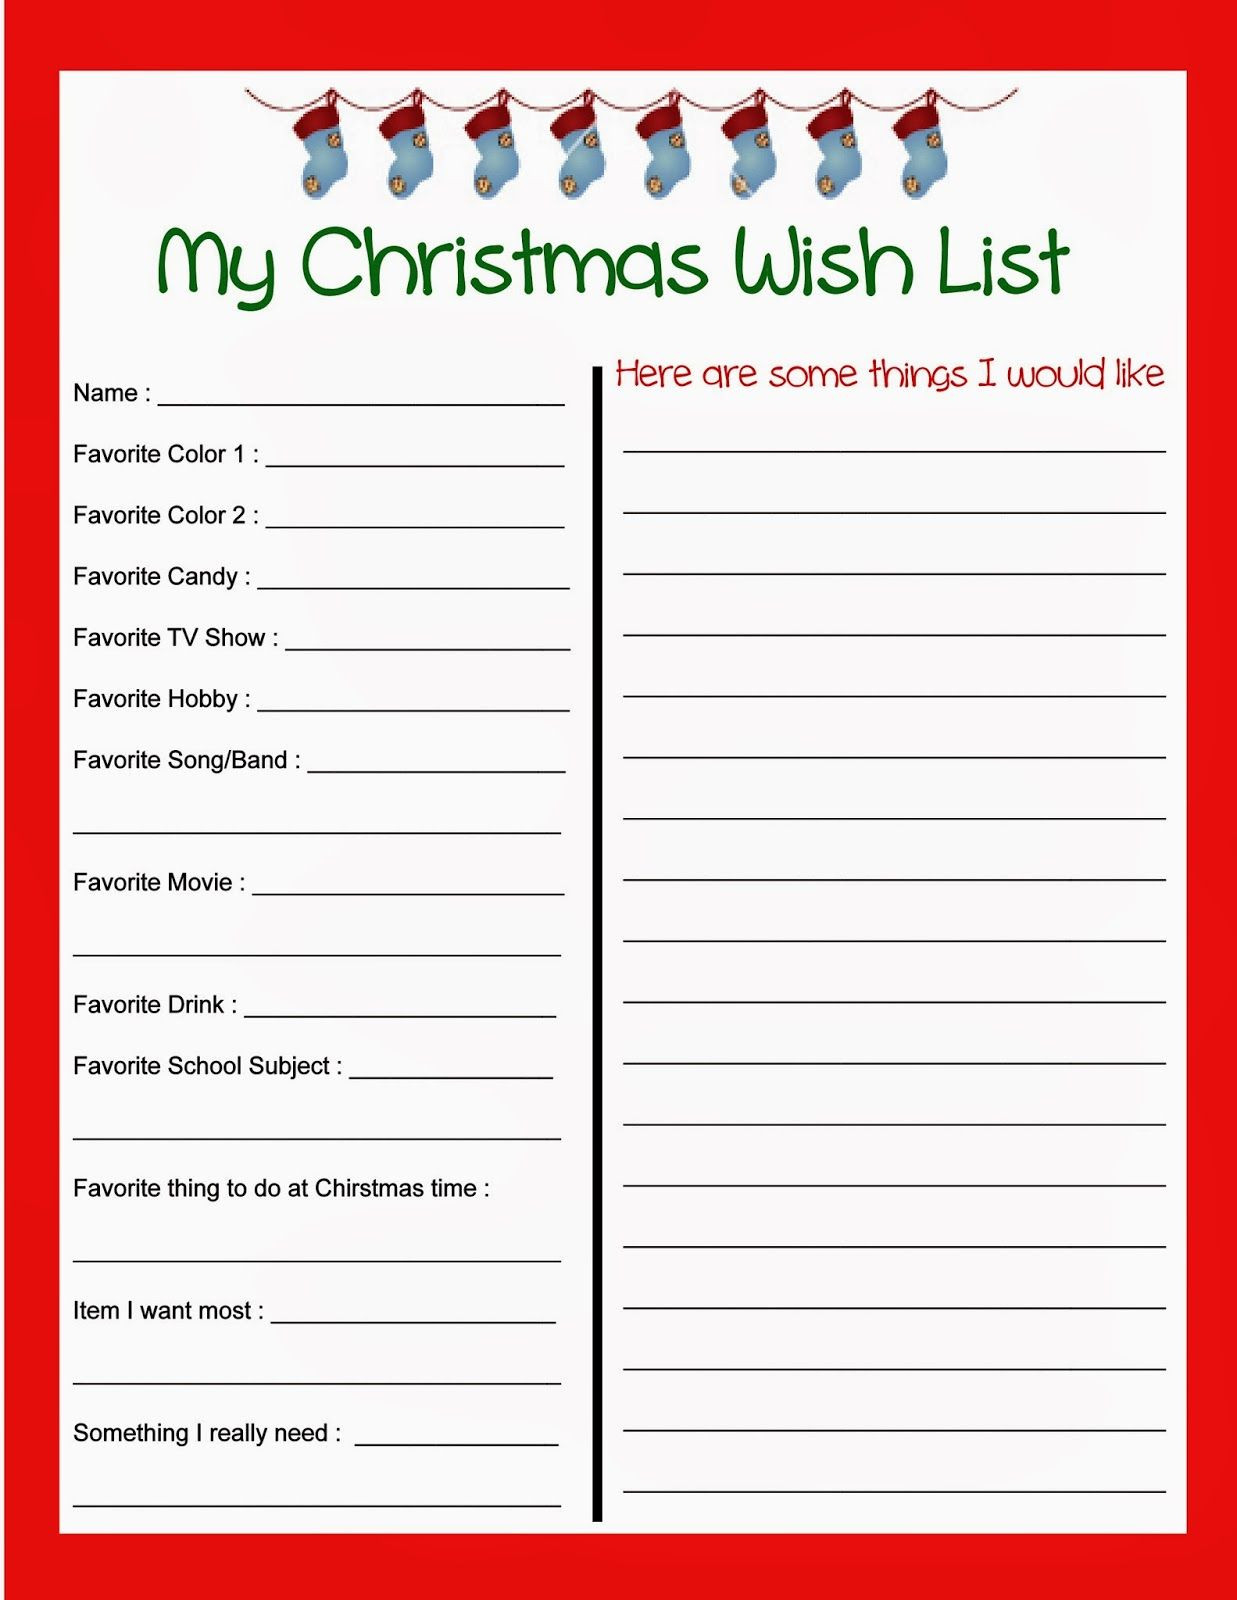 Christmas Party Letter Template - Sample Invitation Card for Christmas Party Unique Invitation Letter